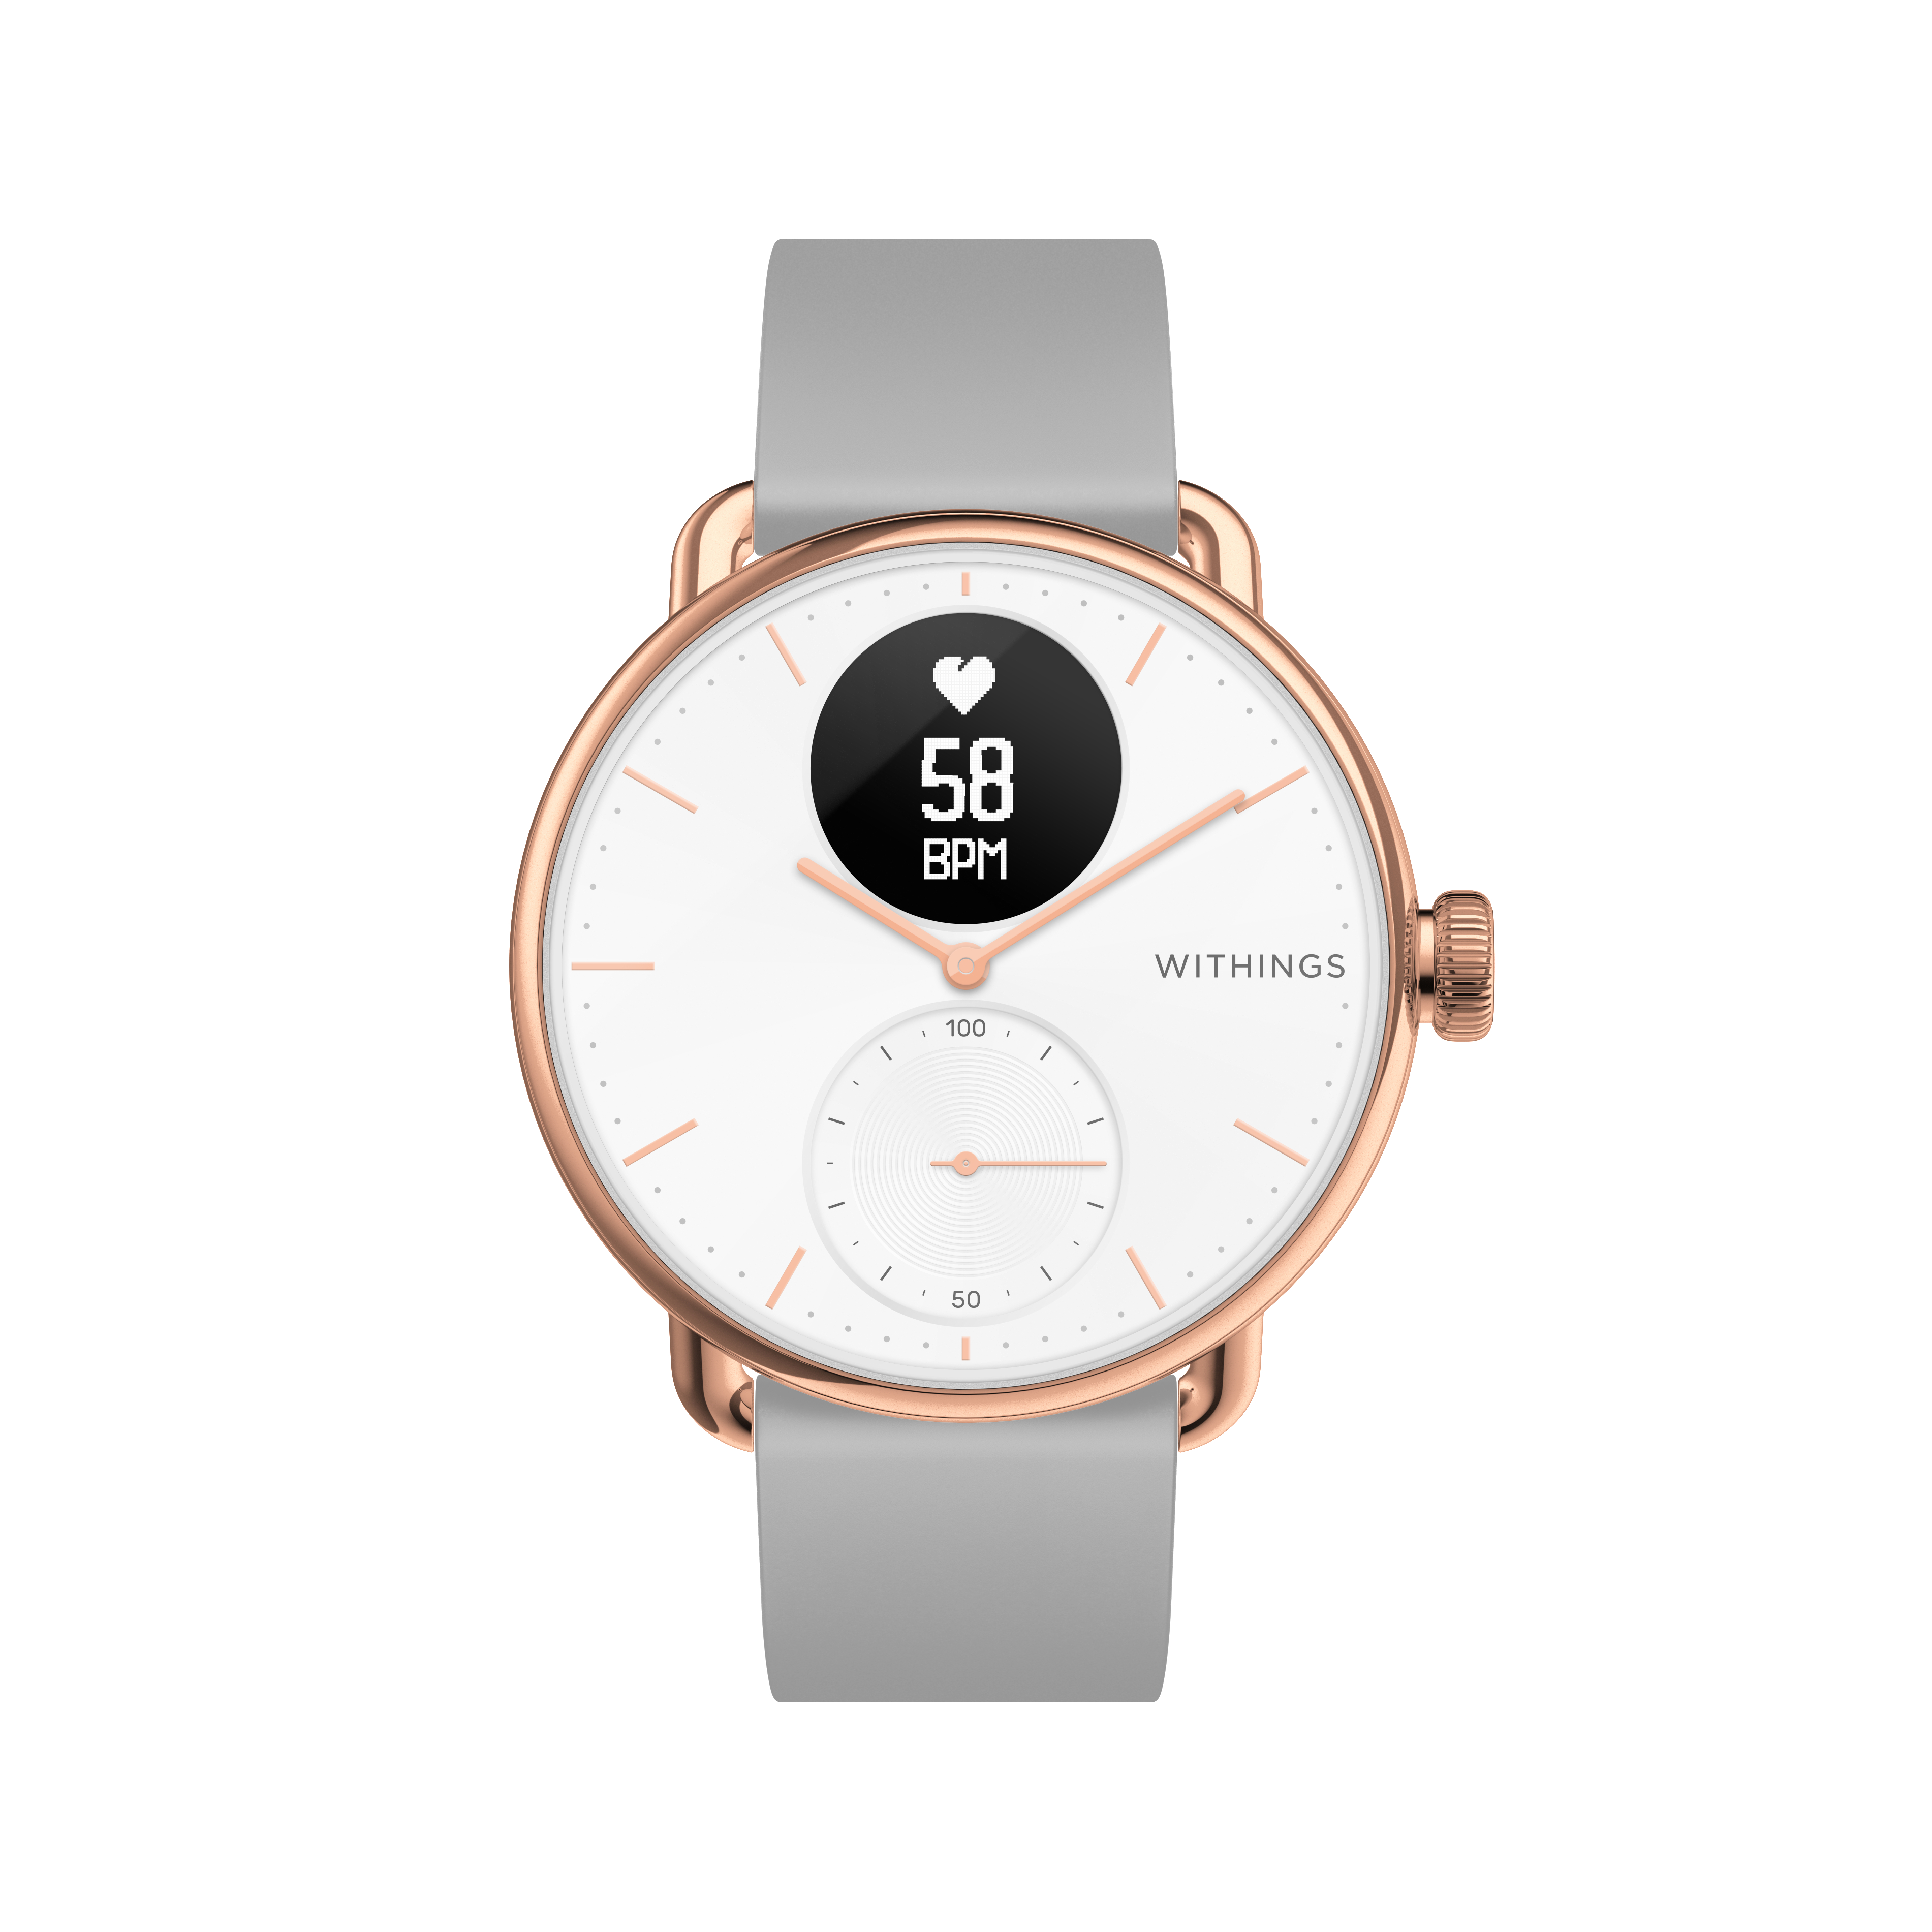 Edelstahl 210 mm, rose WITHINGS gold Smartwatch ScanWatch Elastomer,